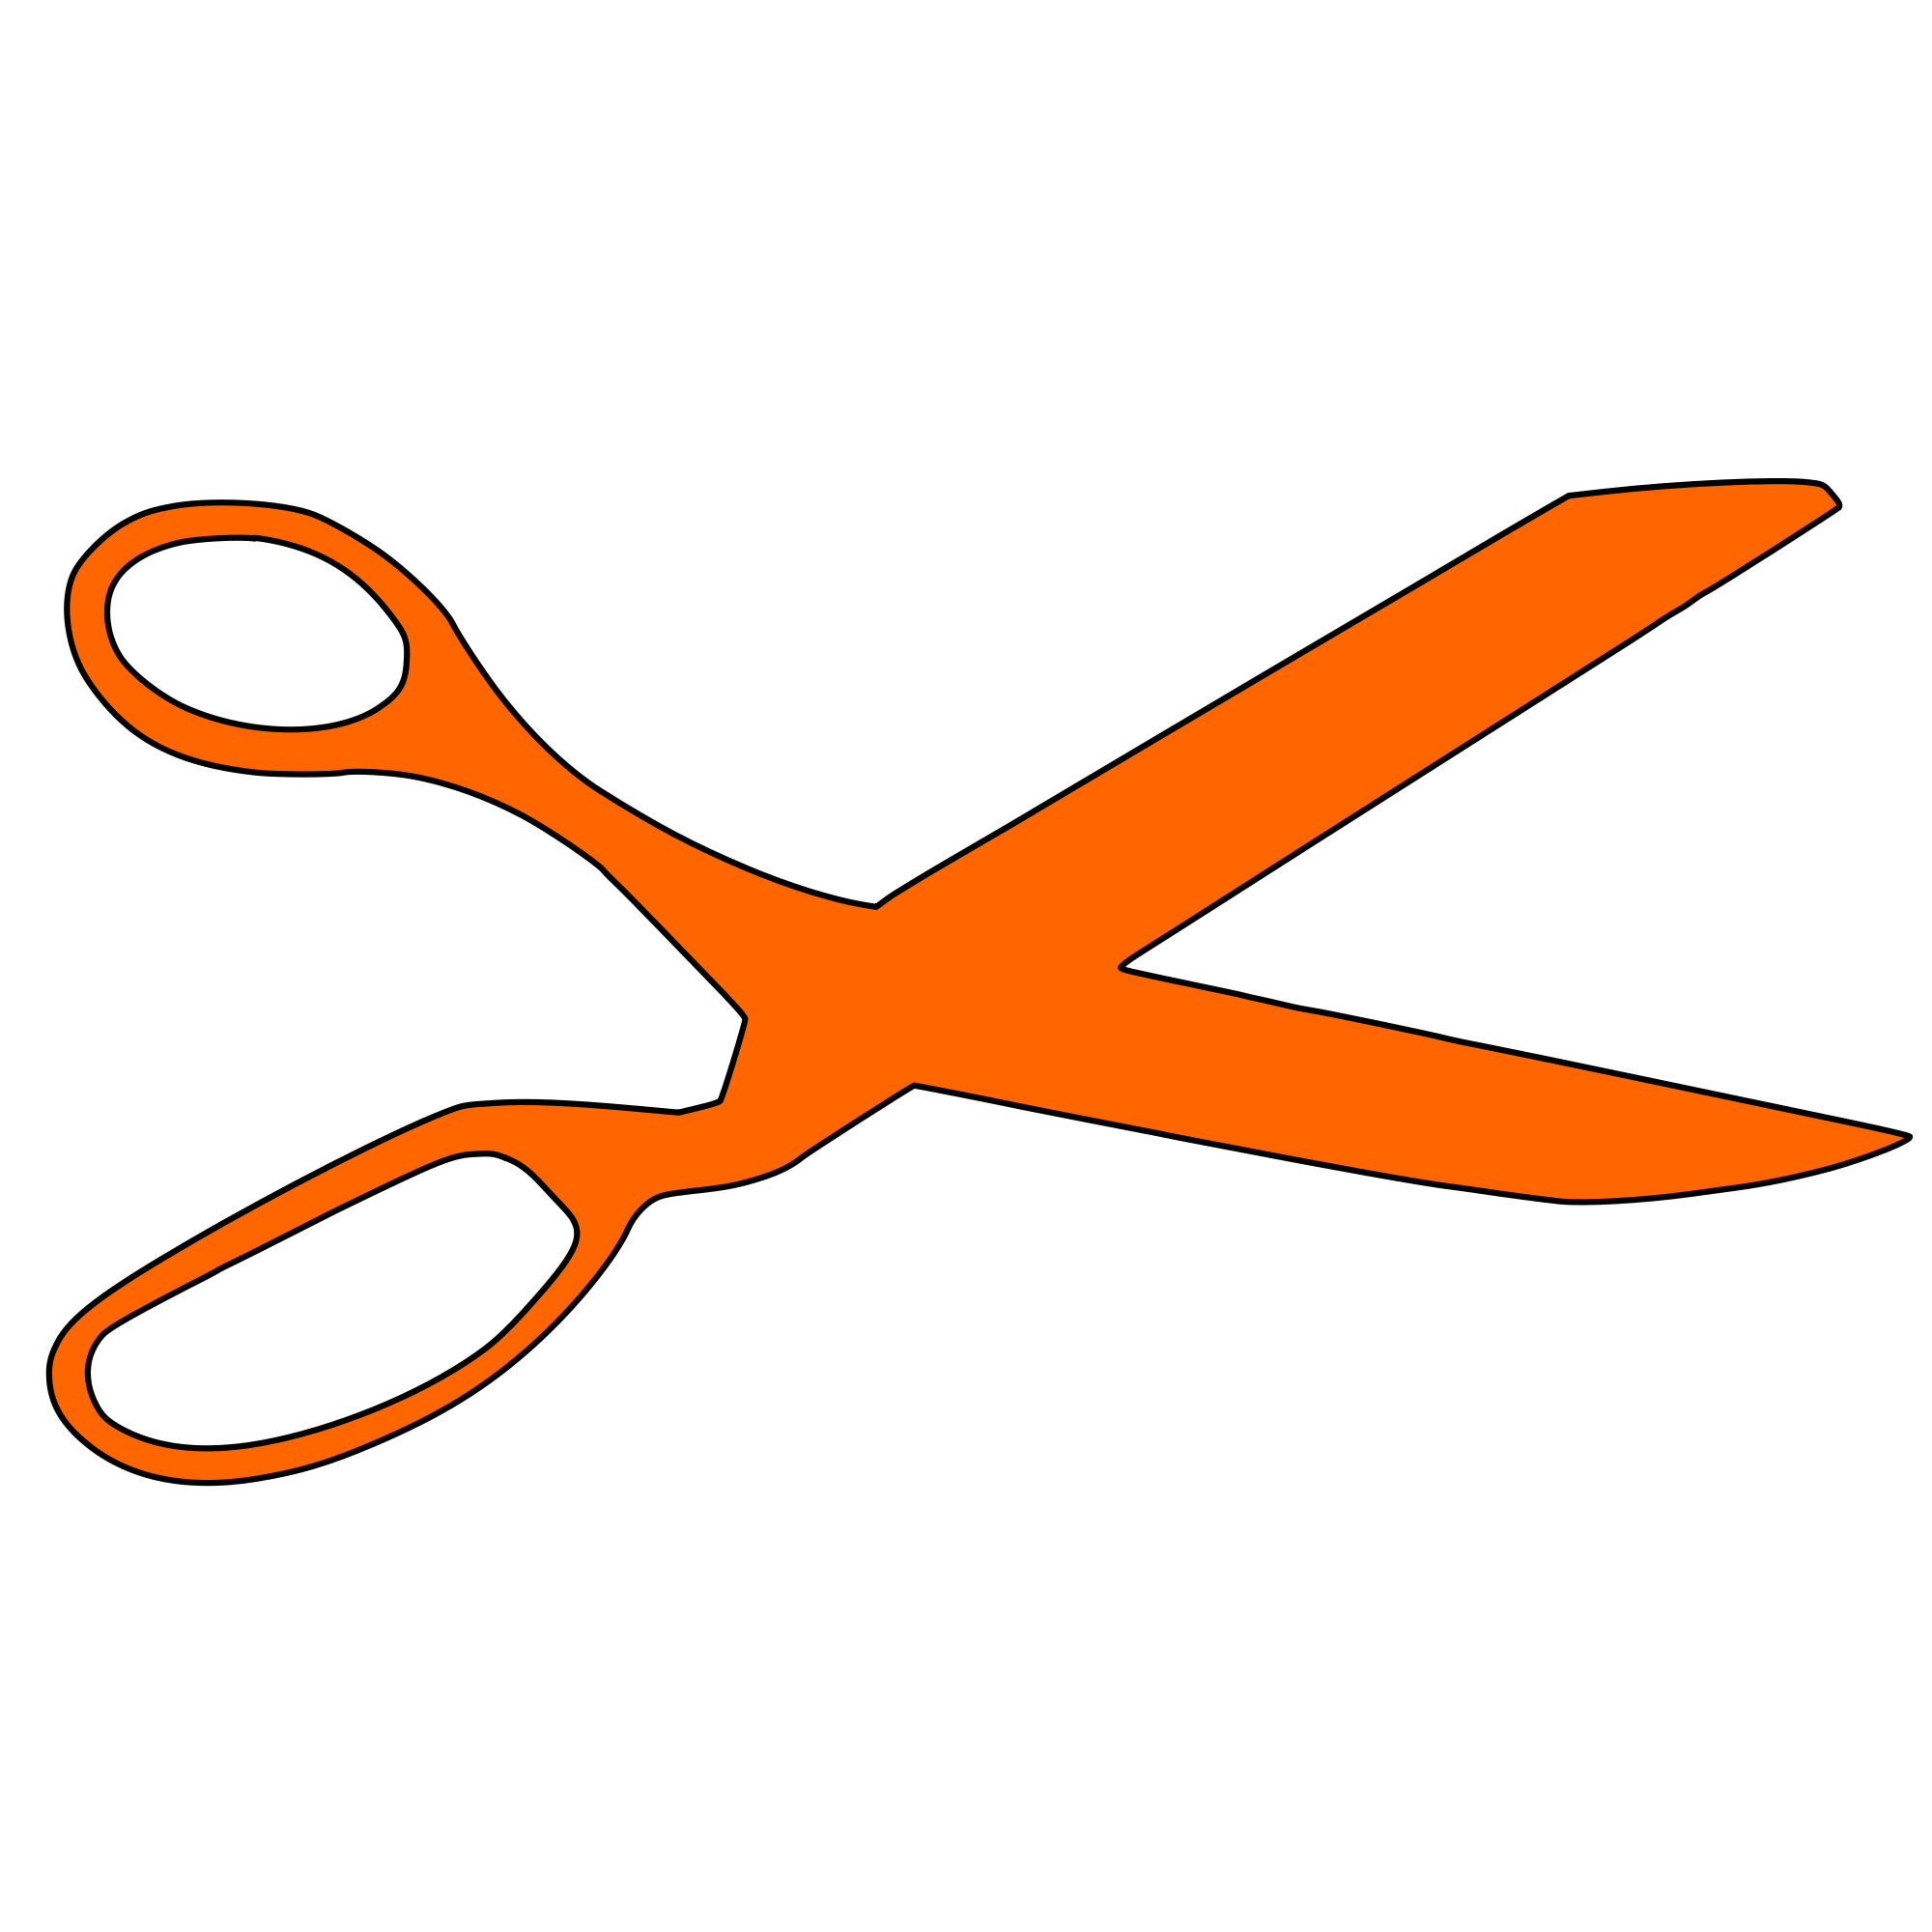 Scissors silhouette at getdrawings. Shears clipart use